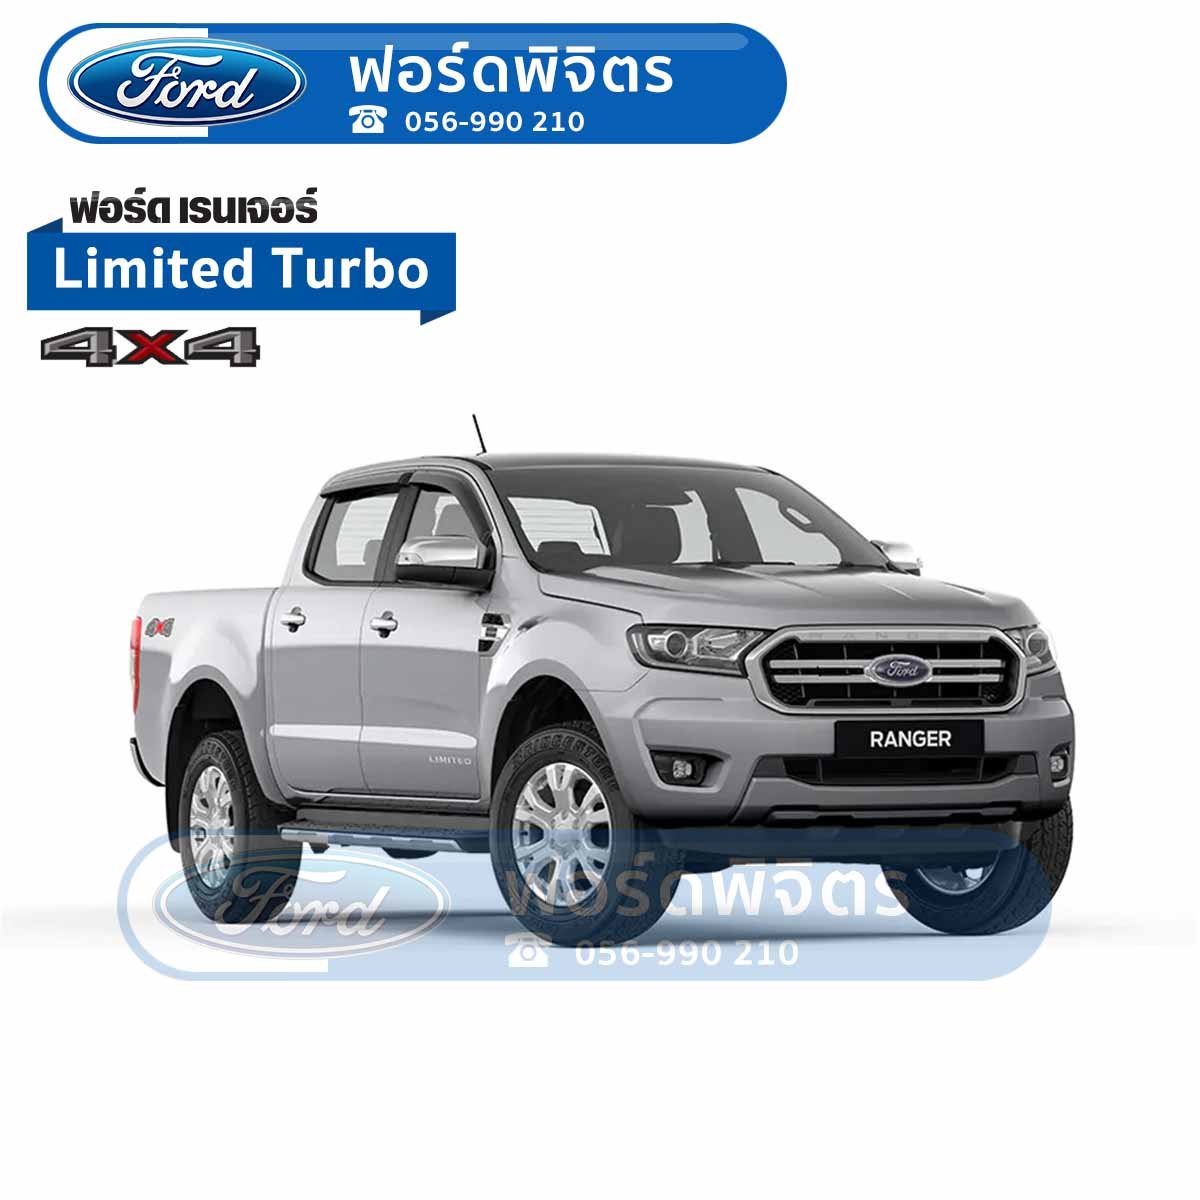 Limited Turbo 4x4 10AT